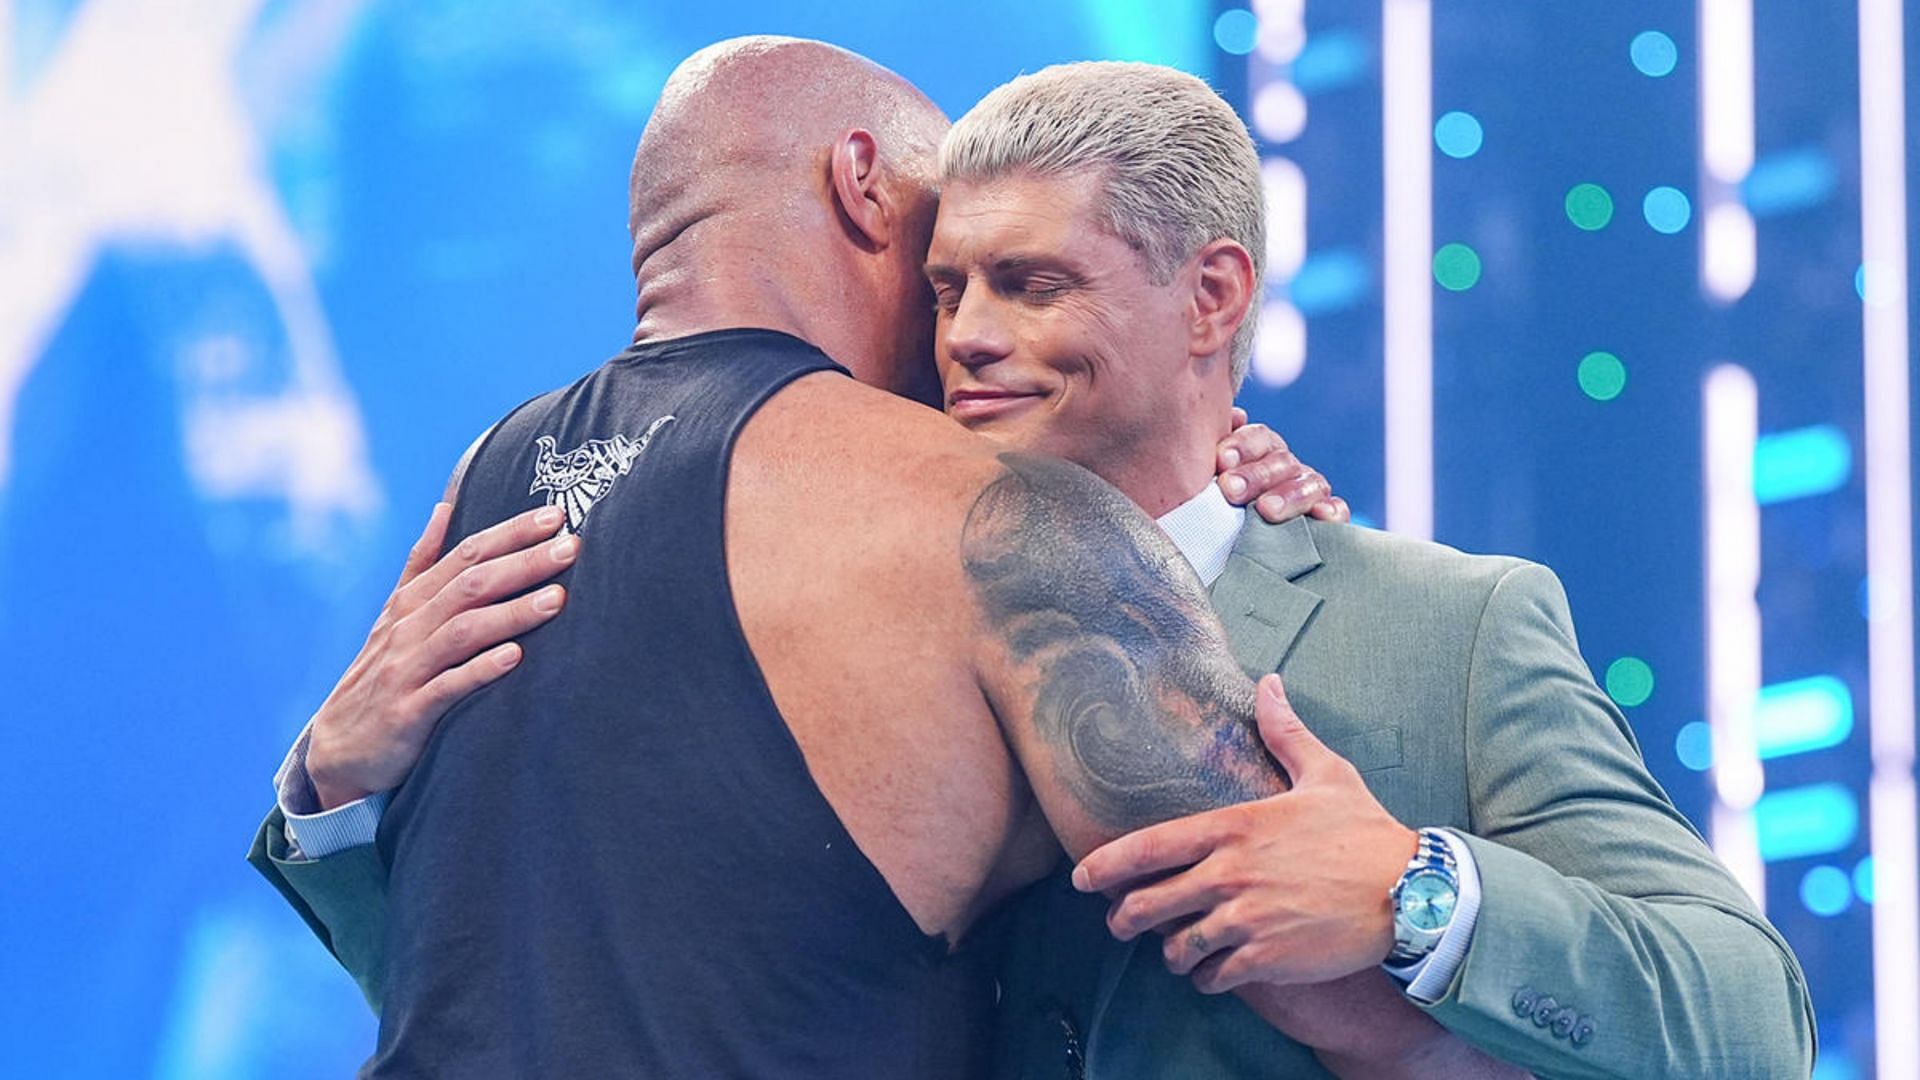 Should WWE change their WrestleMania plans for Cody Rhodes?